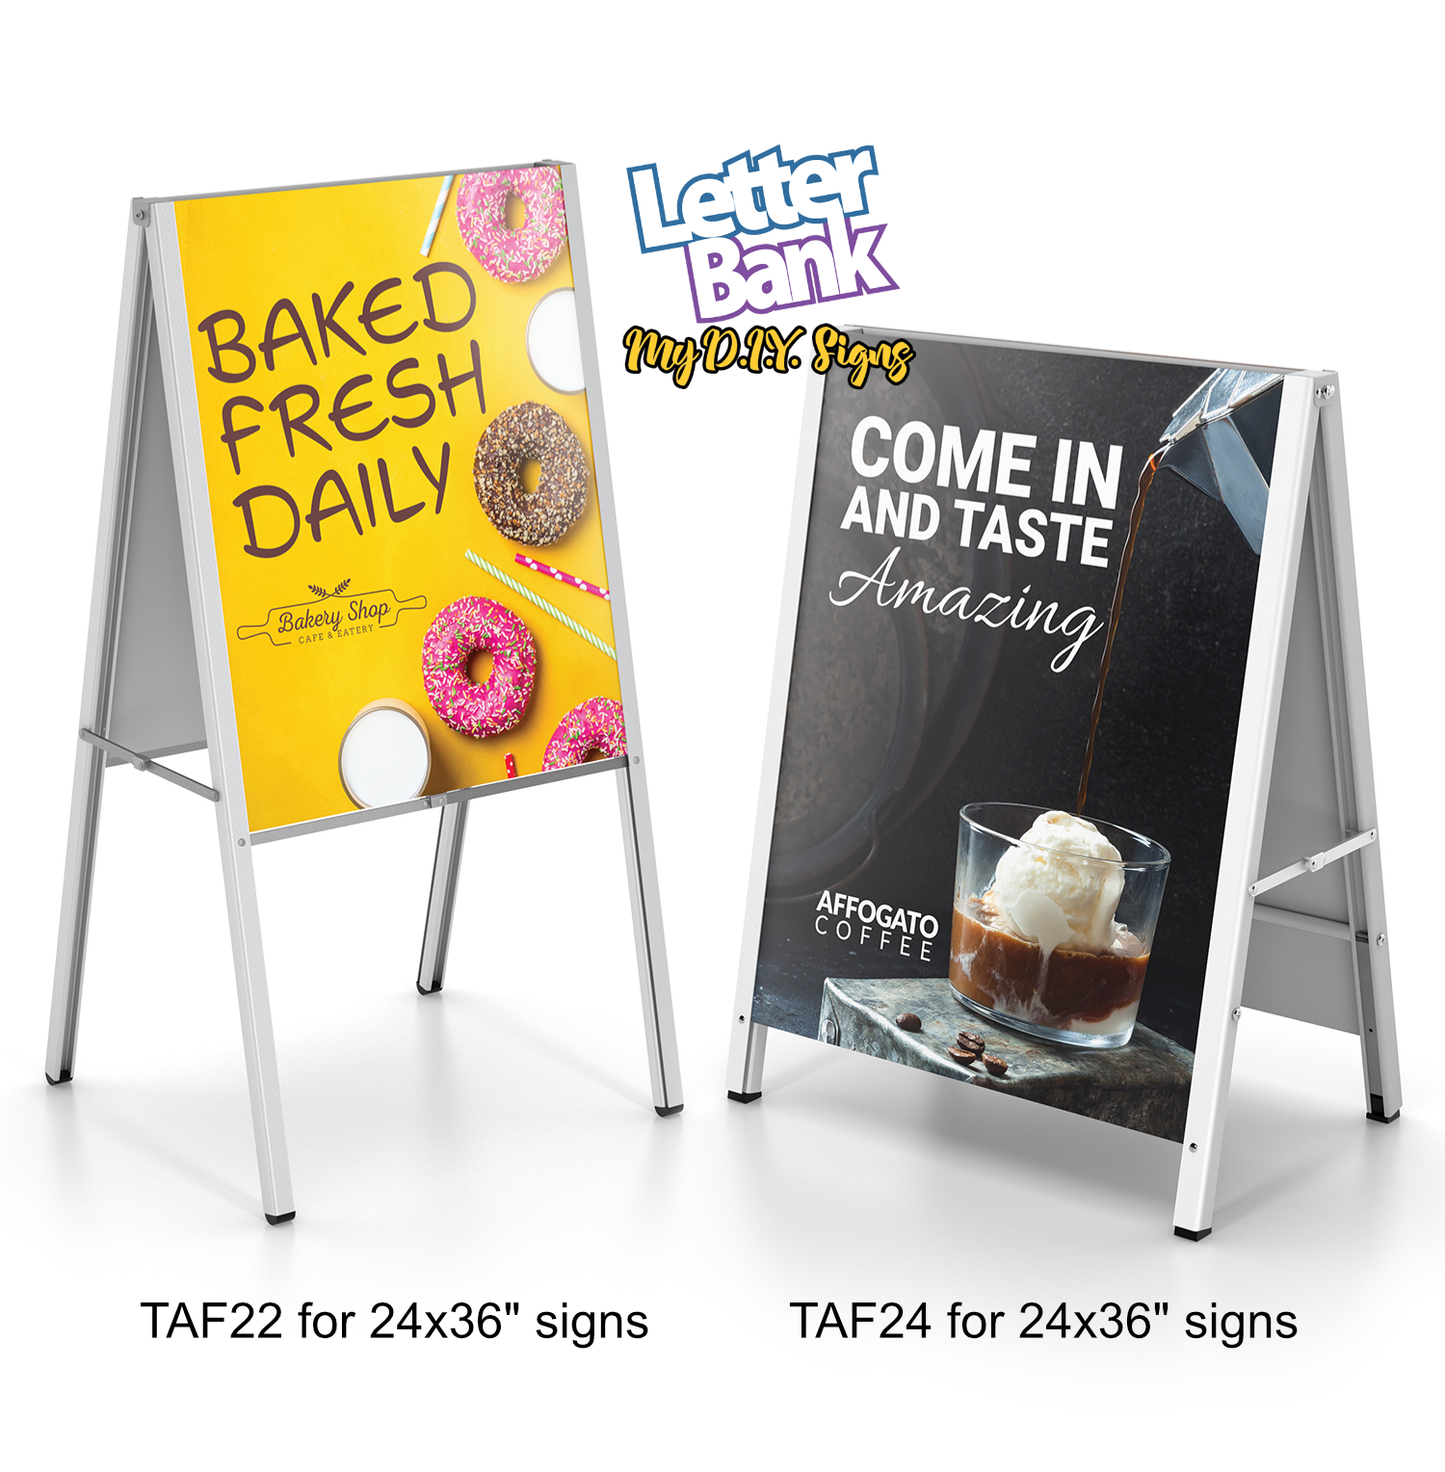 Collapsible A-frame Sign Board Frames for 24x36" inserts